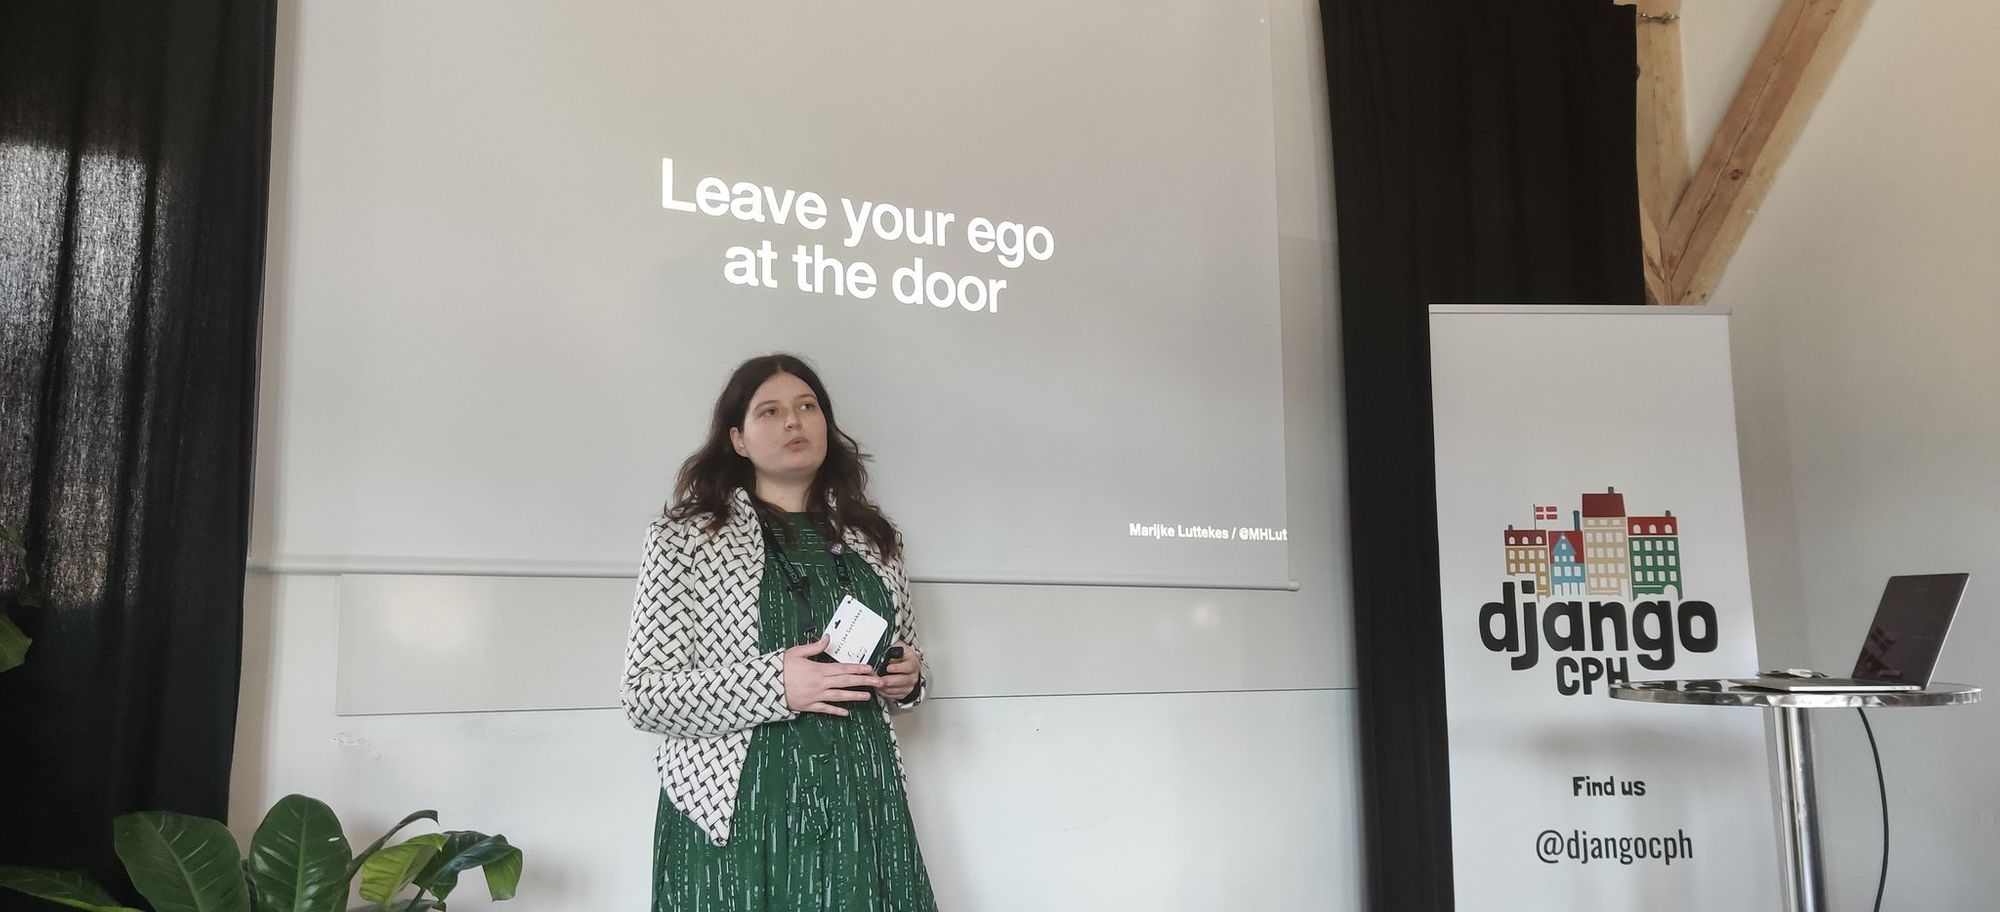 Marijke speaking on stage with a slide about leaving your ego at the door